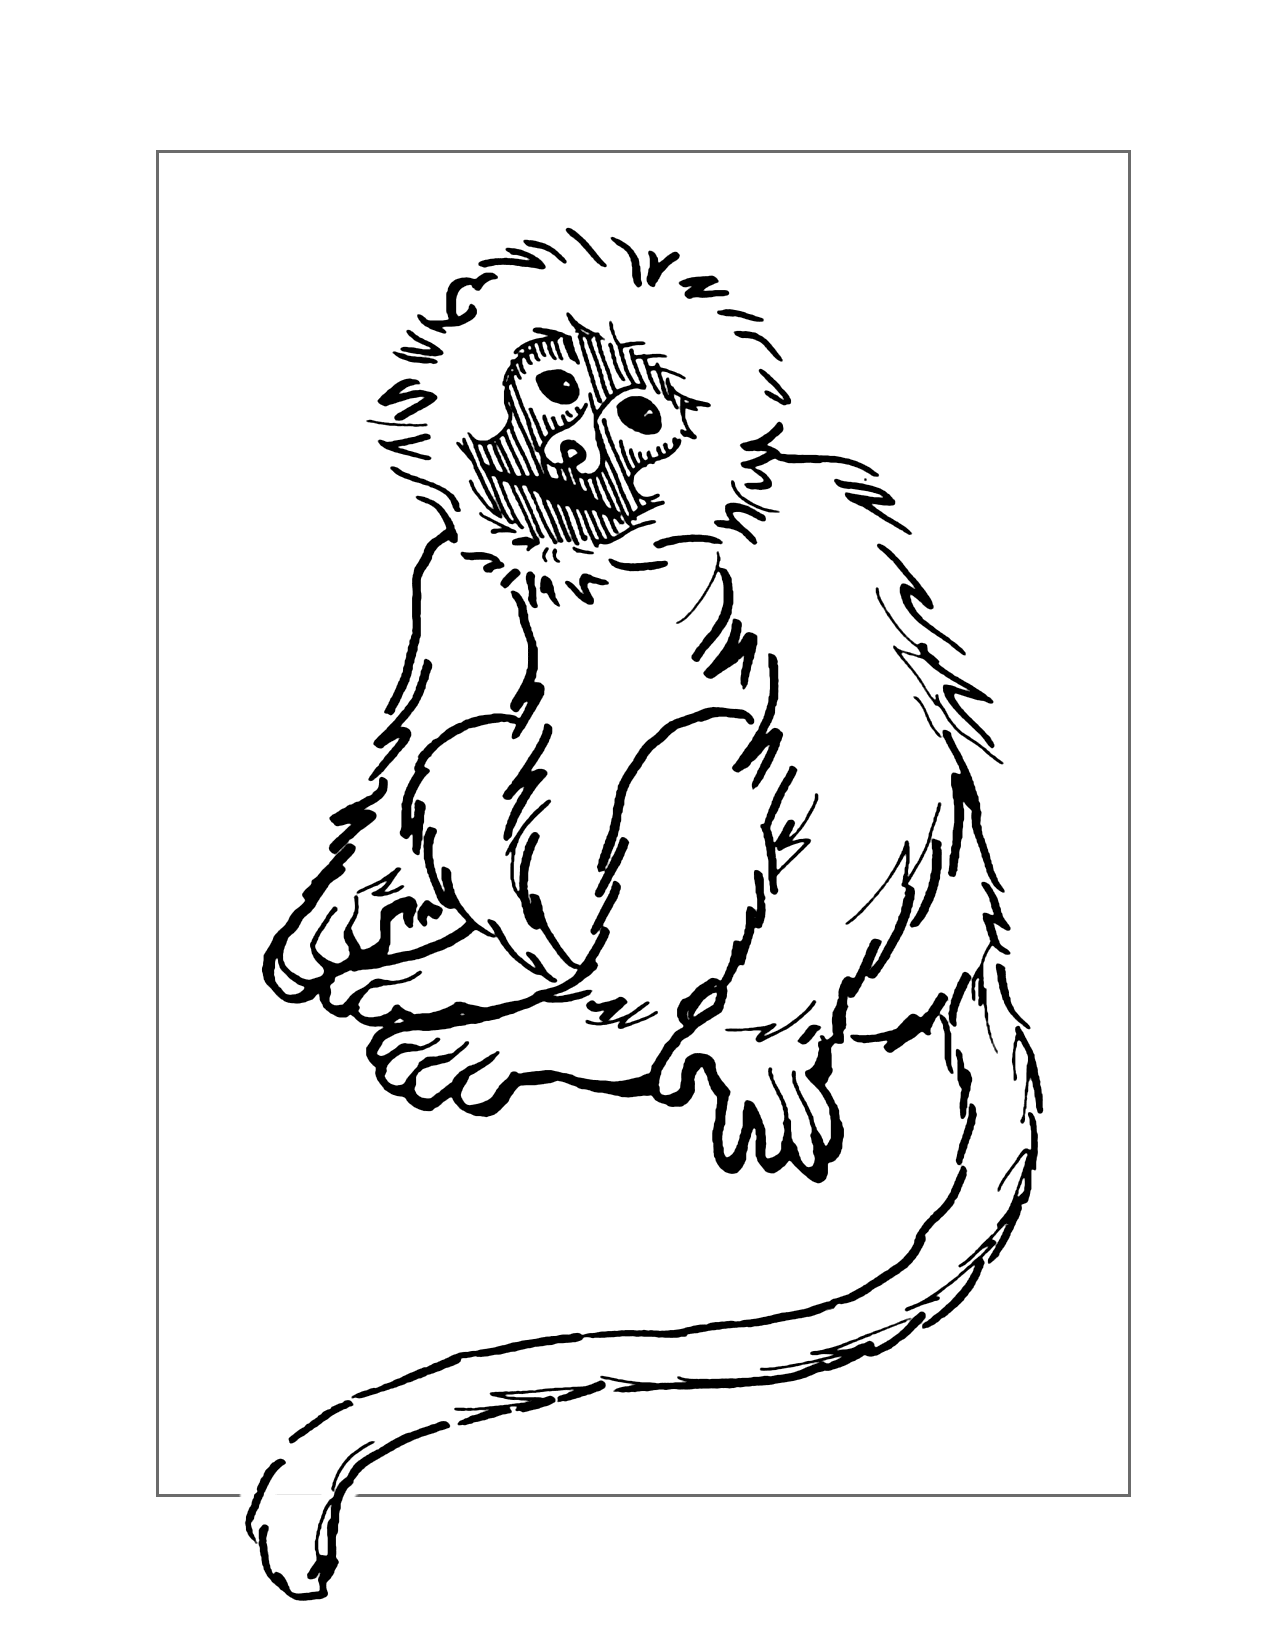 Fuzzy Monkey Coloring Page